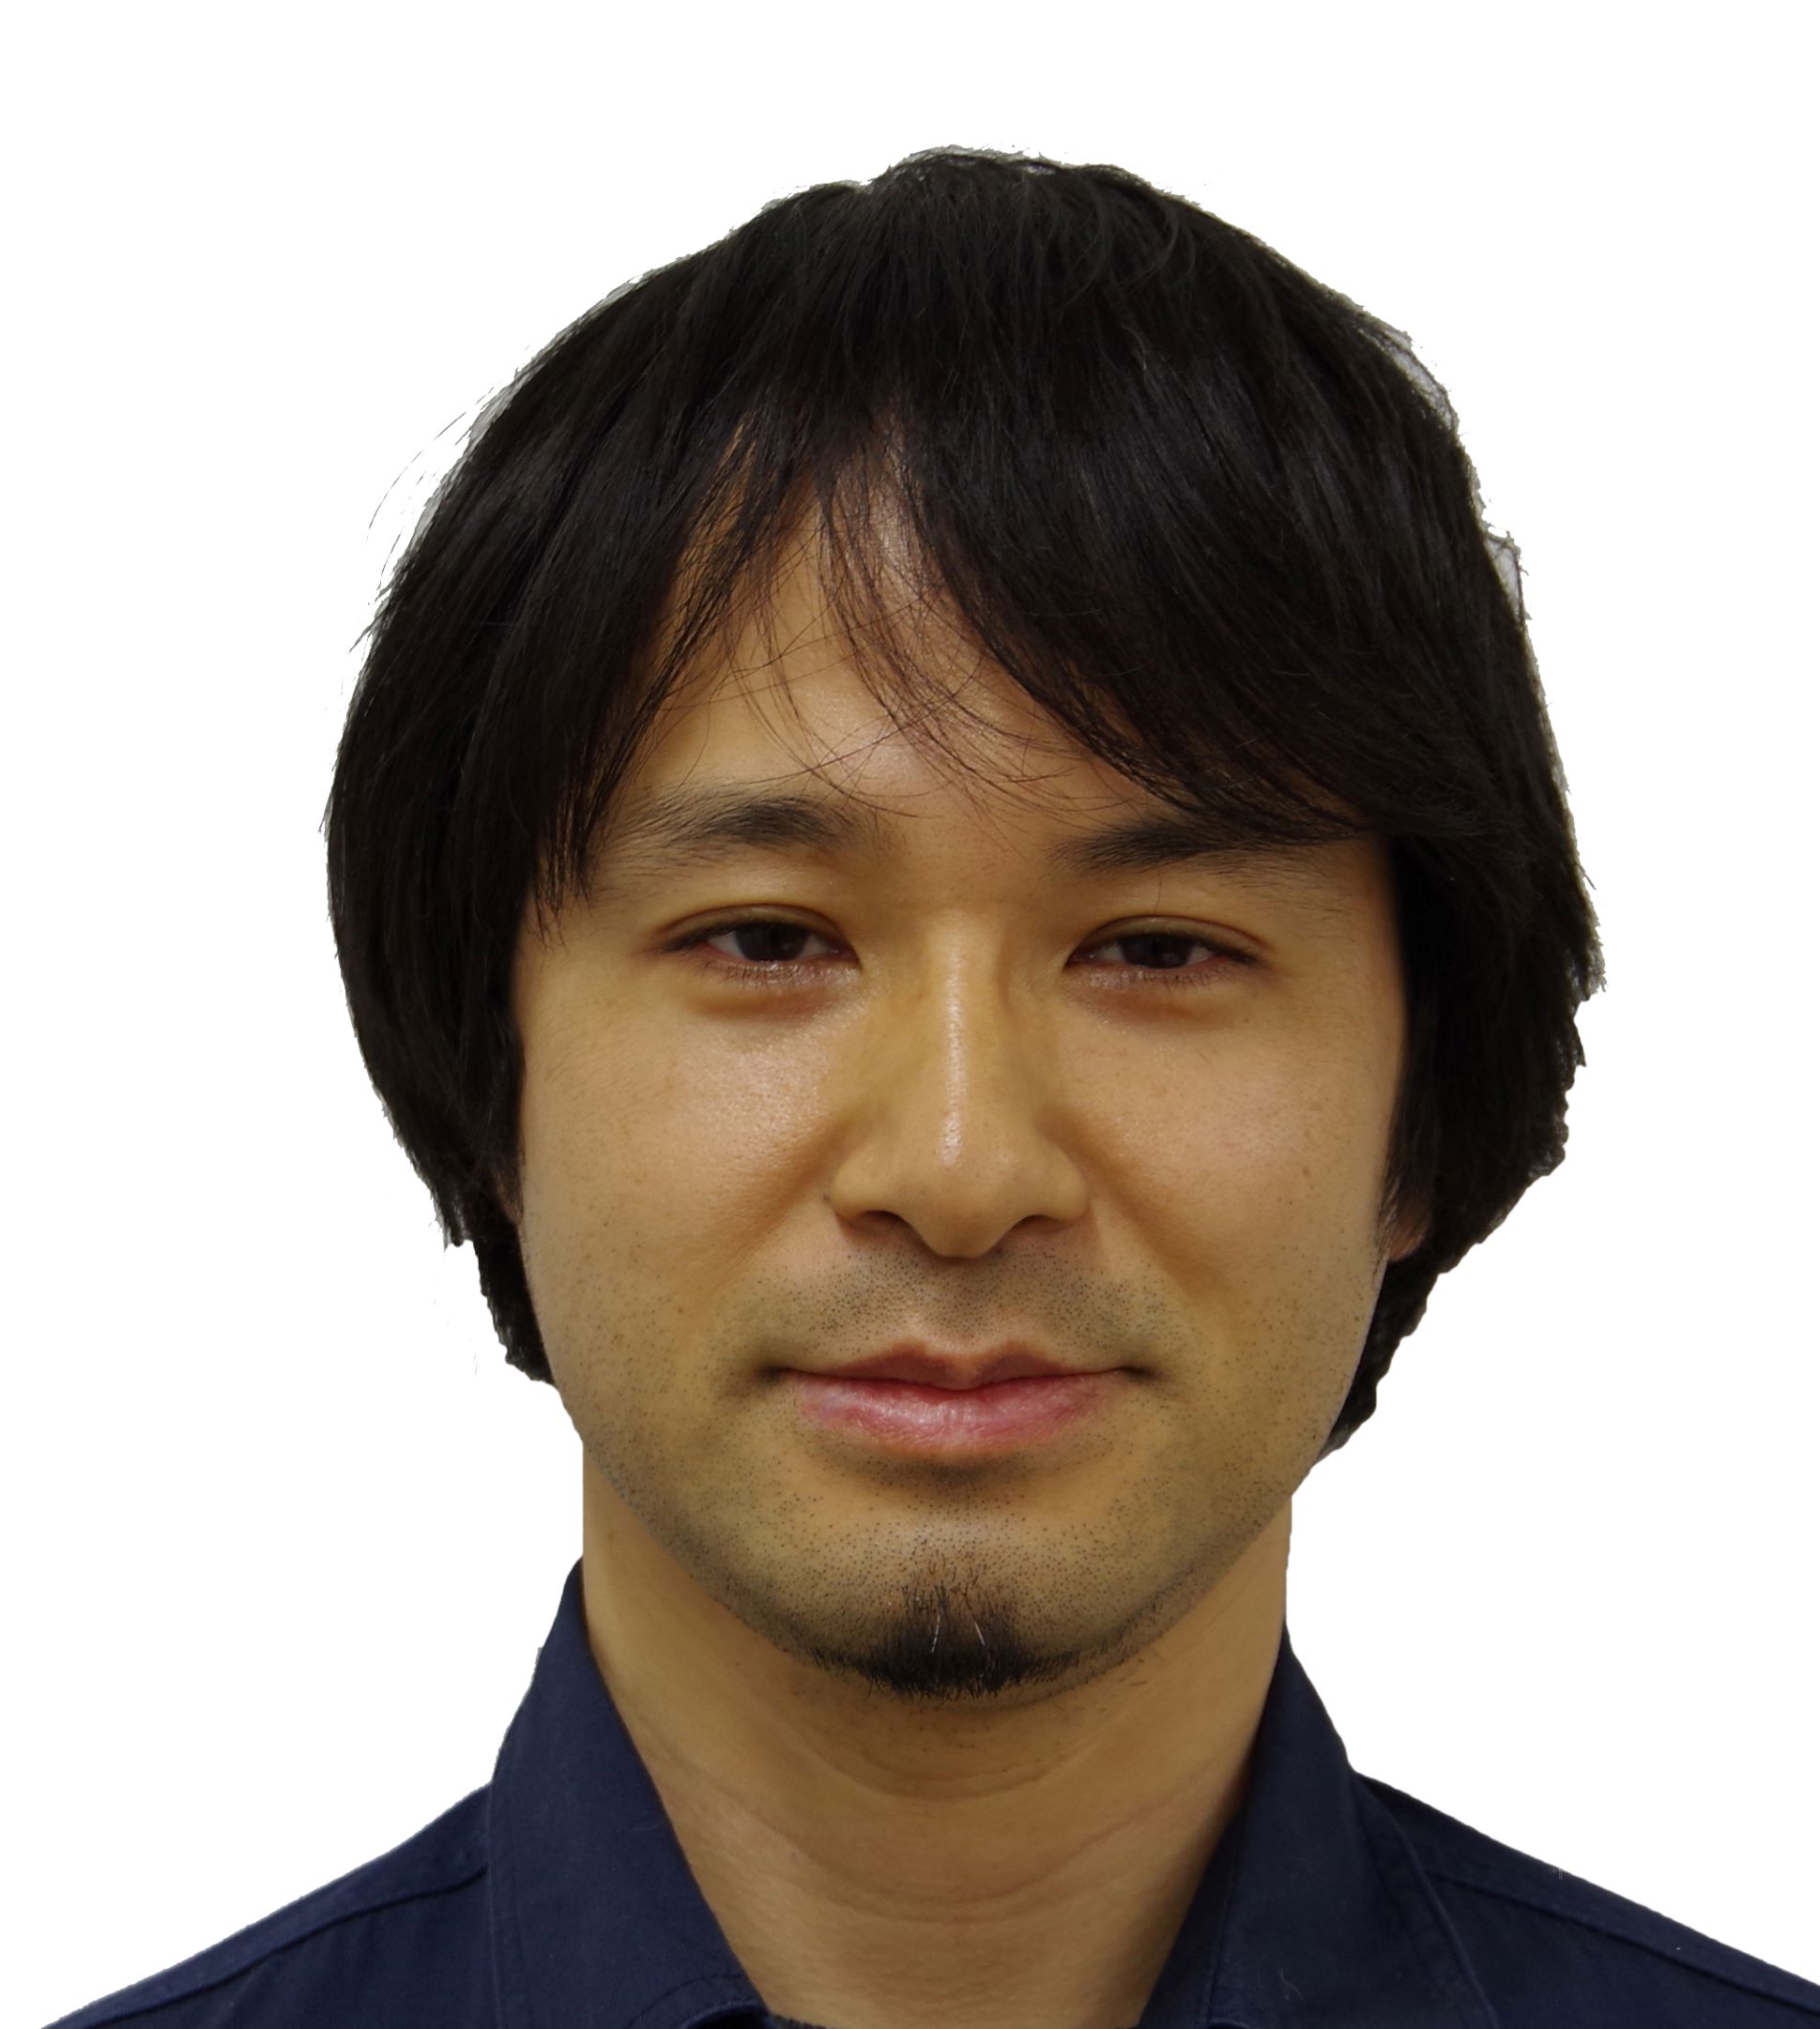 Dr. Masanori Okanishi (currently Assistant Professor at Hiroshima Shudo University) received the 2022 Young Scientist Award from the Minister of Education, Culture, Sports, Science and Technology.